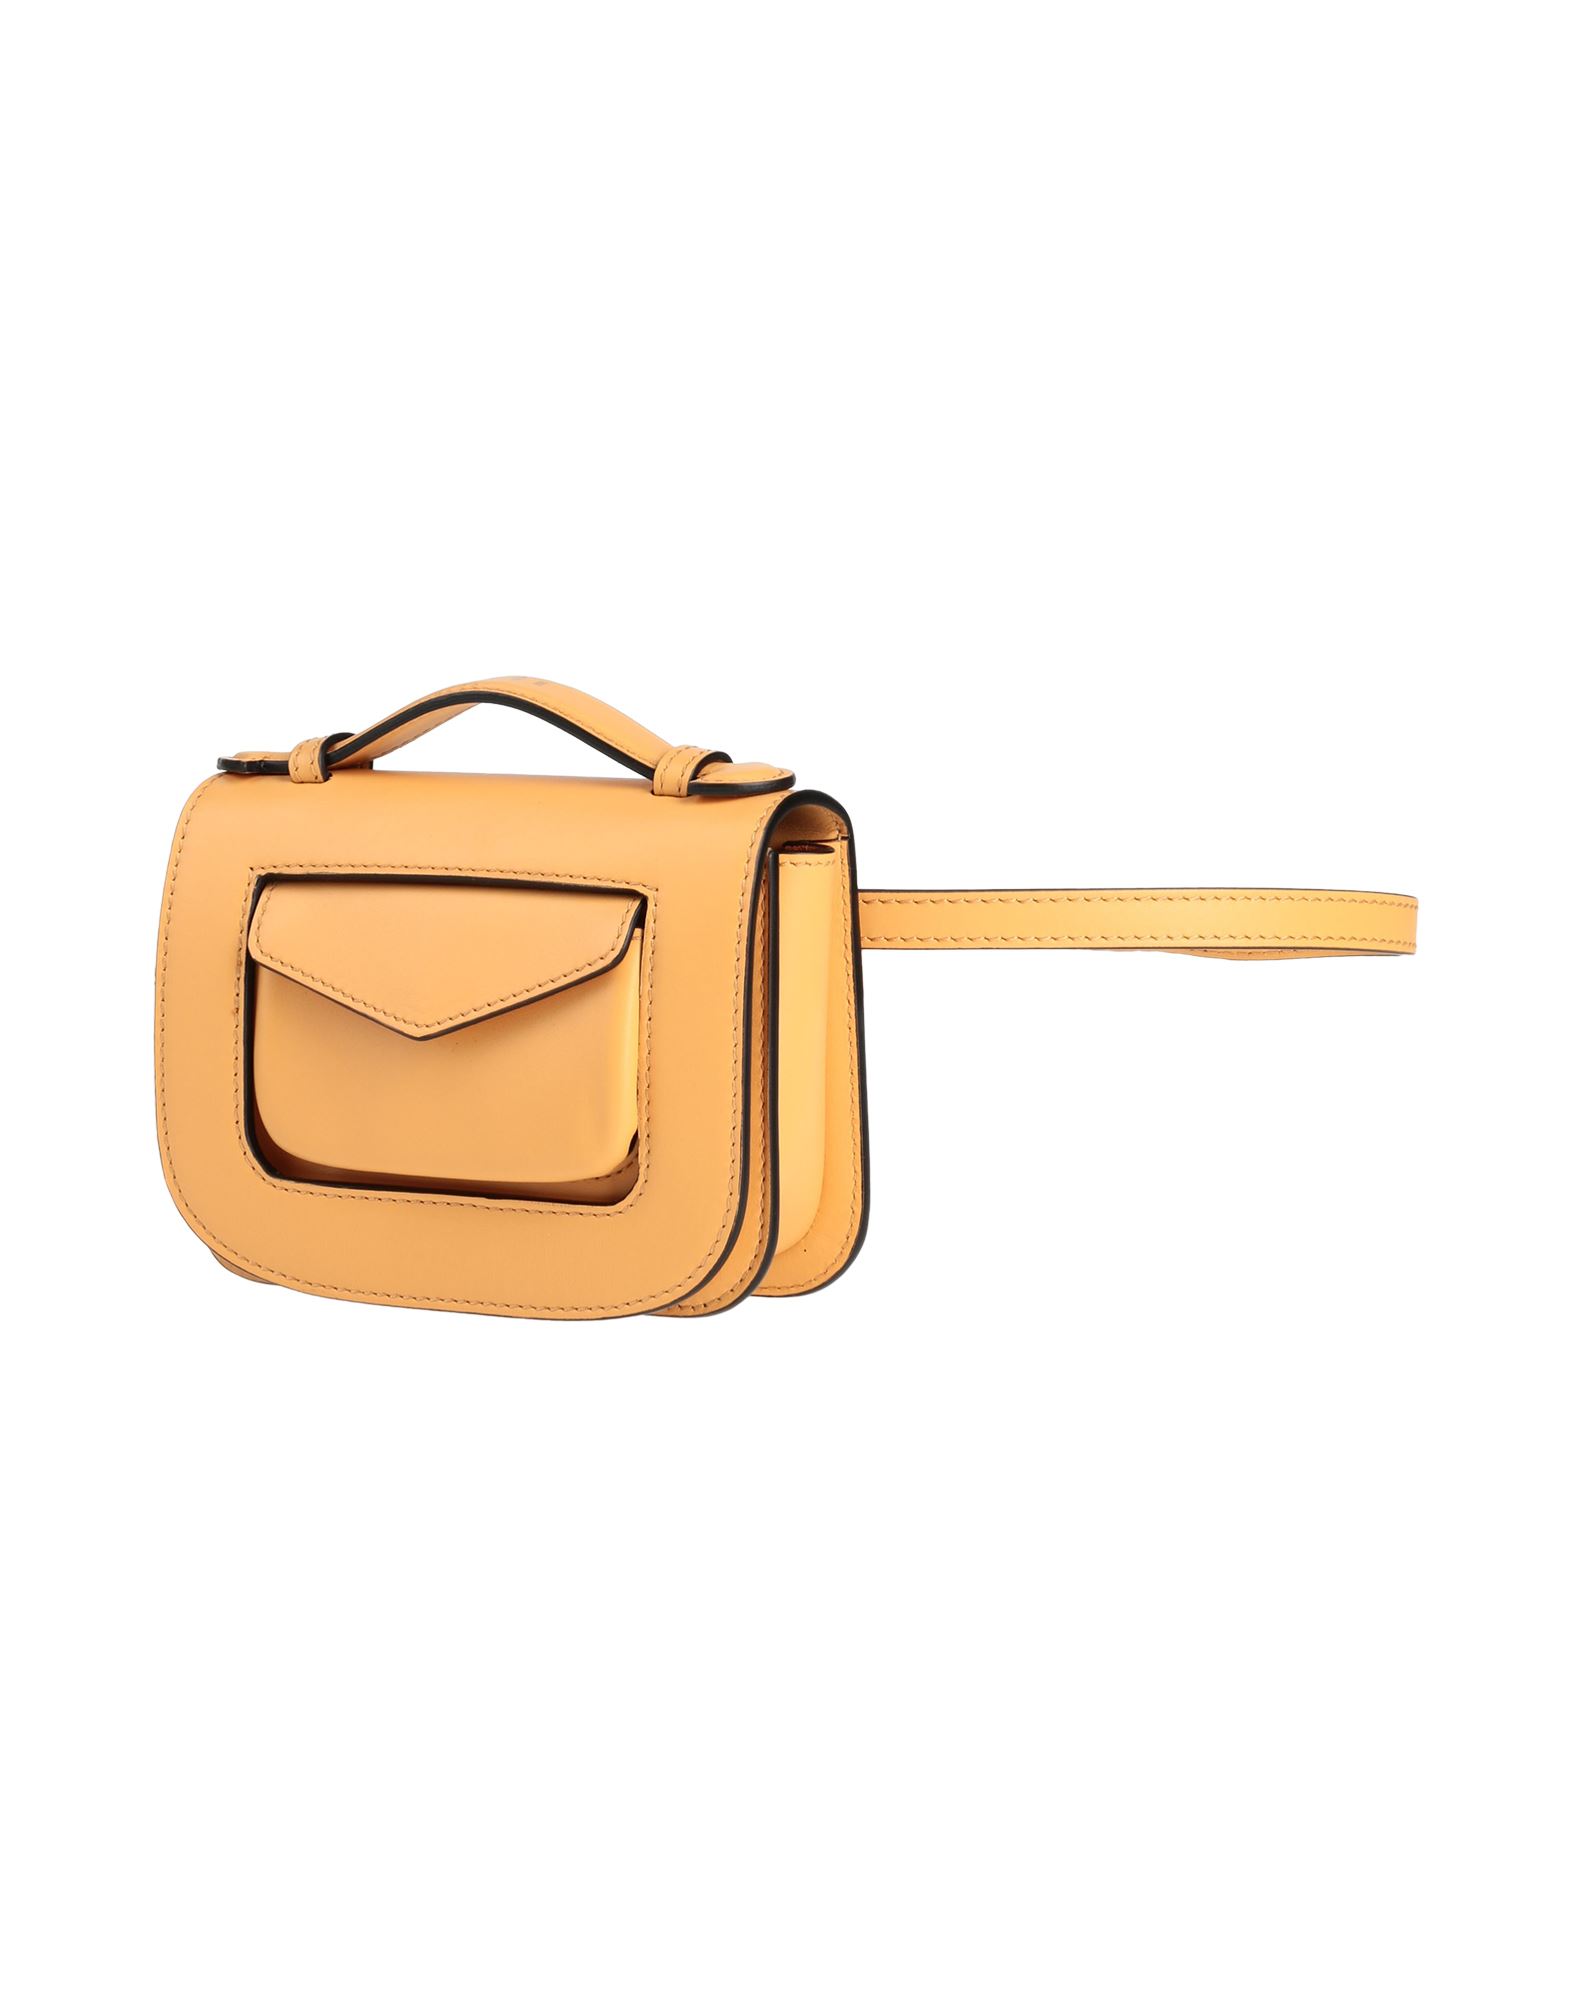 Bum Bags In Apricot